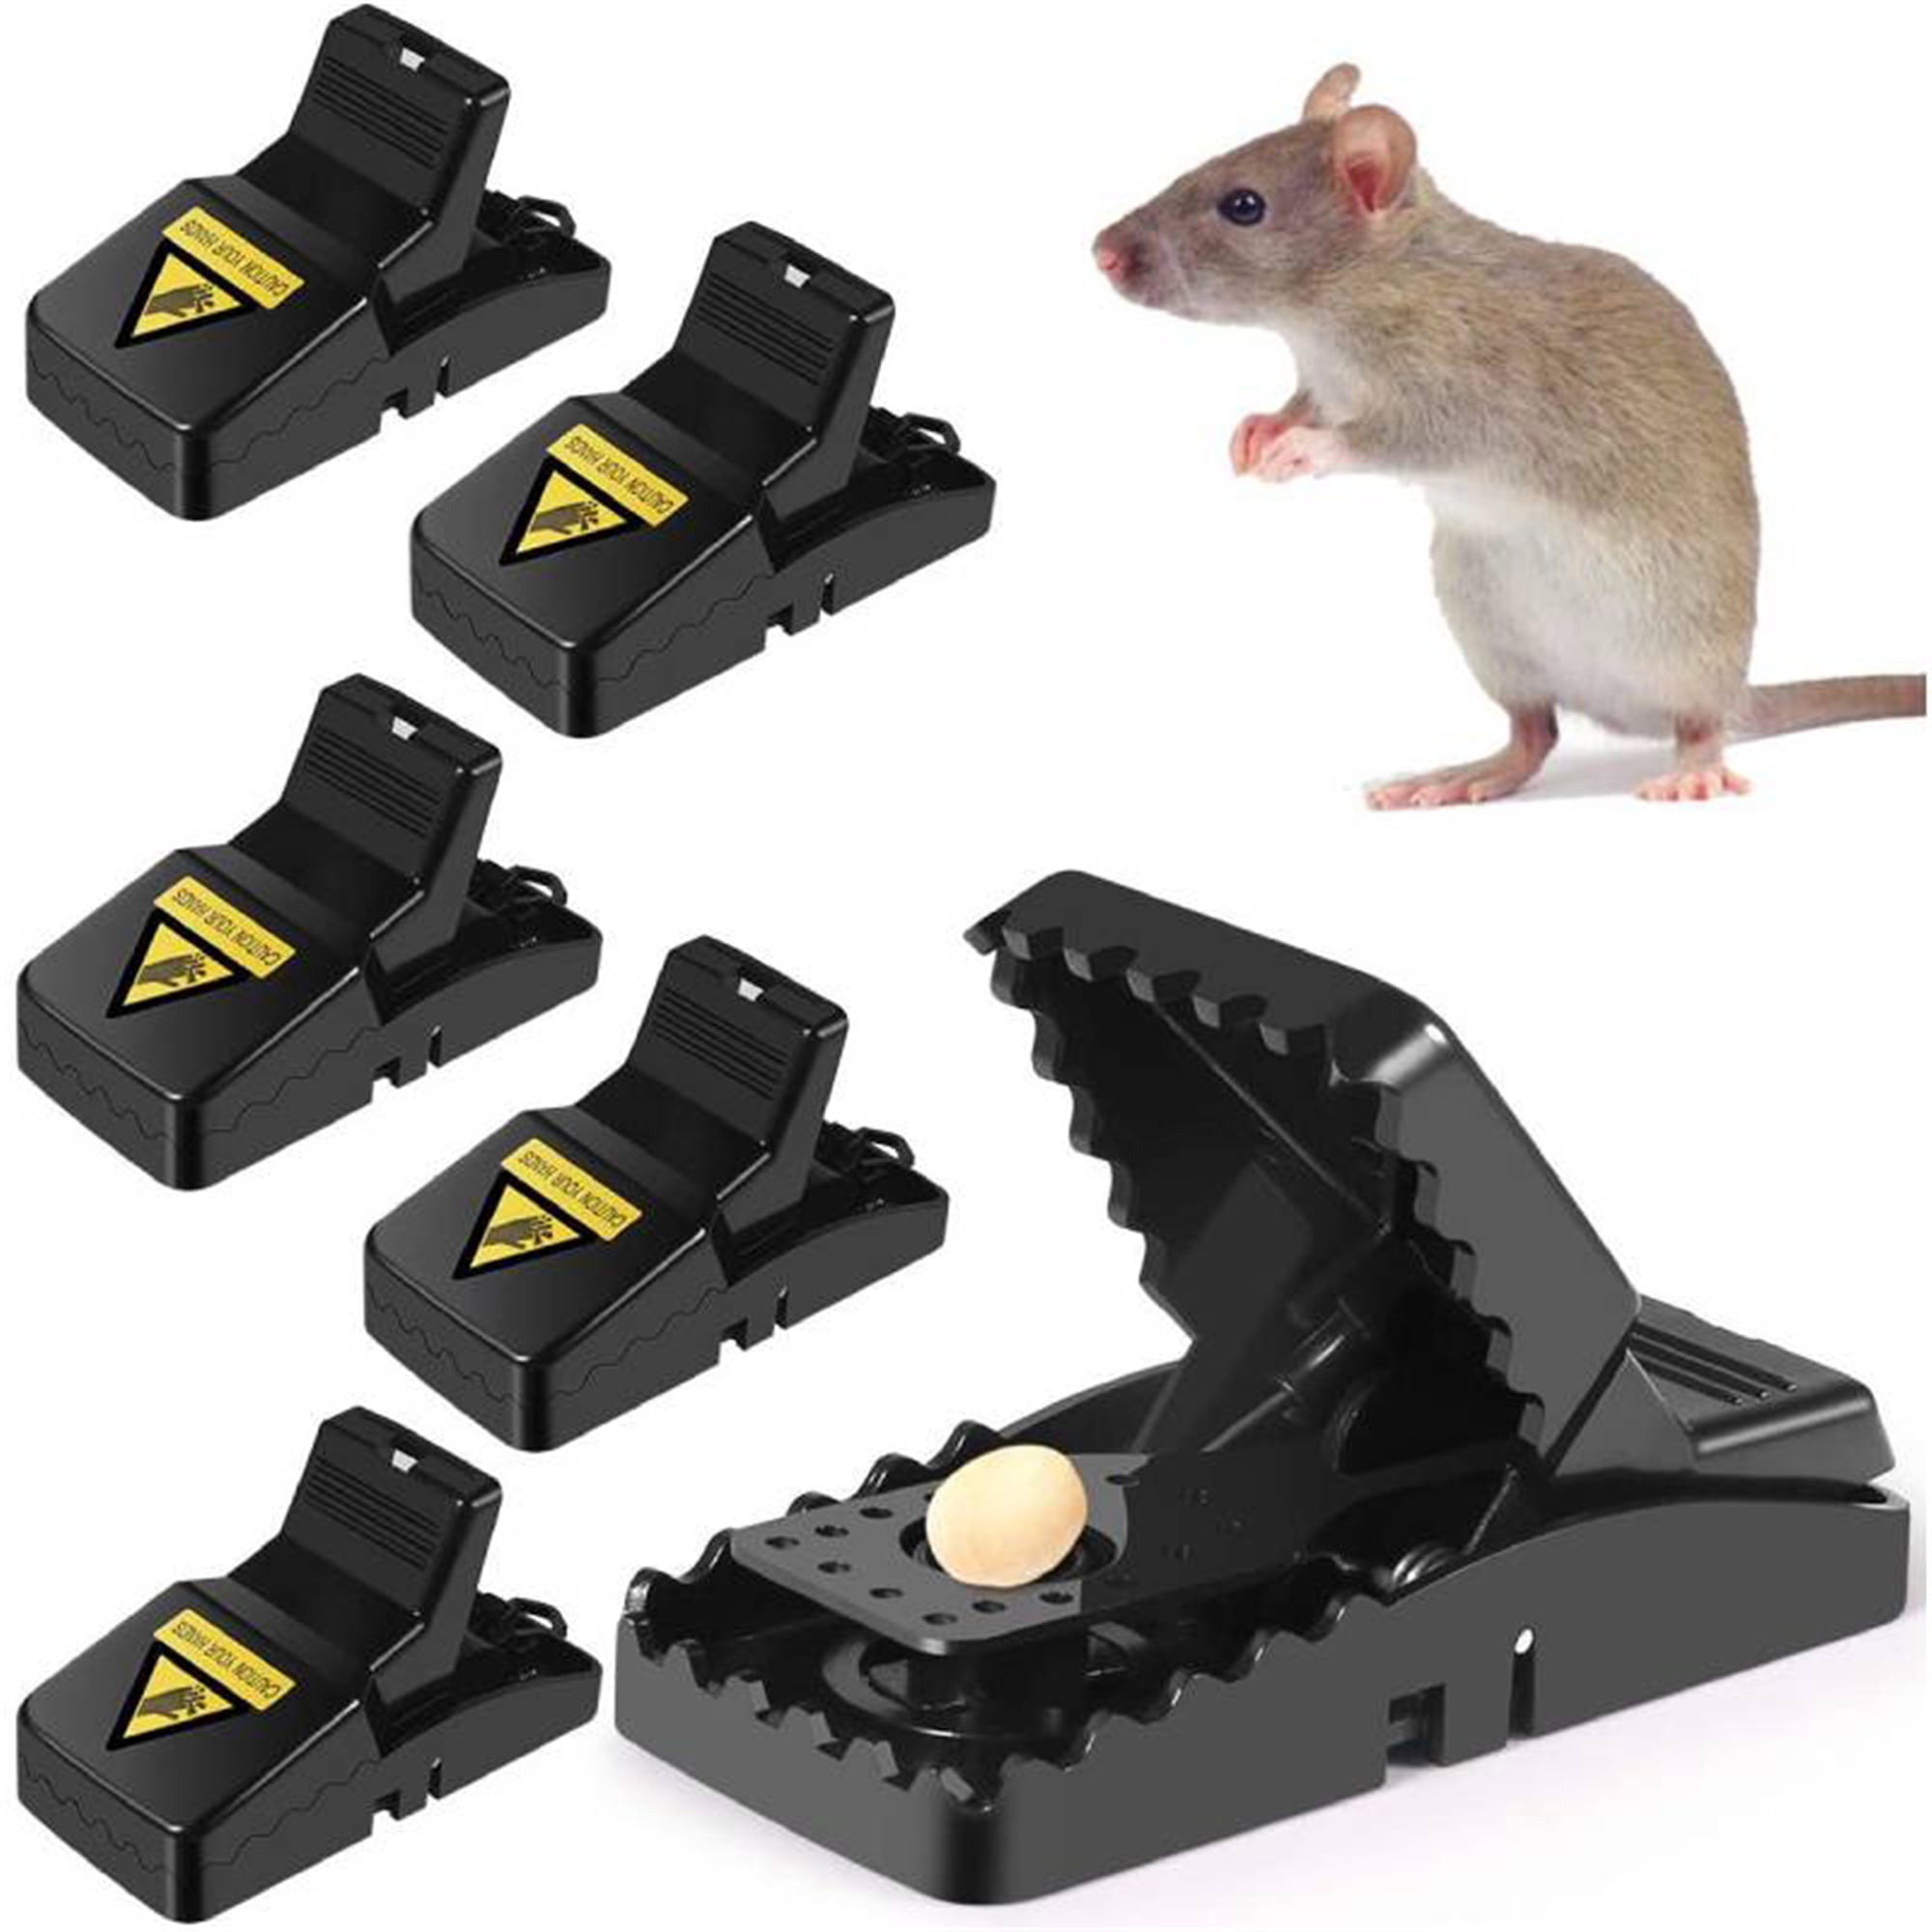 OW7 In-/Outdoor Waterproof Electronic Rodent Trap